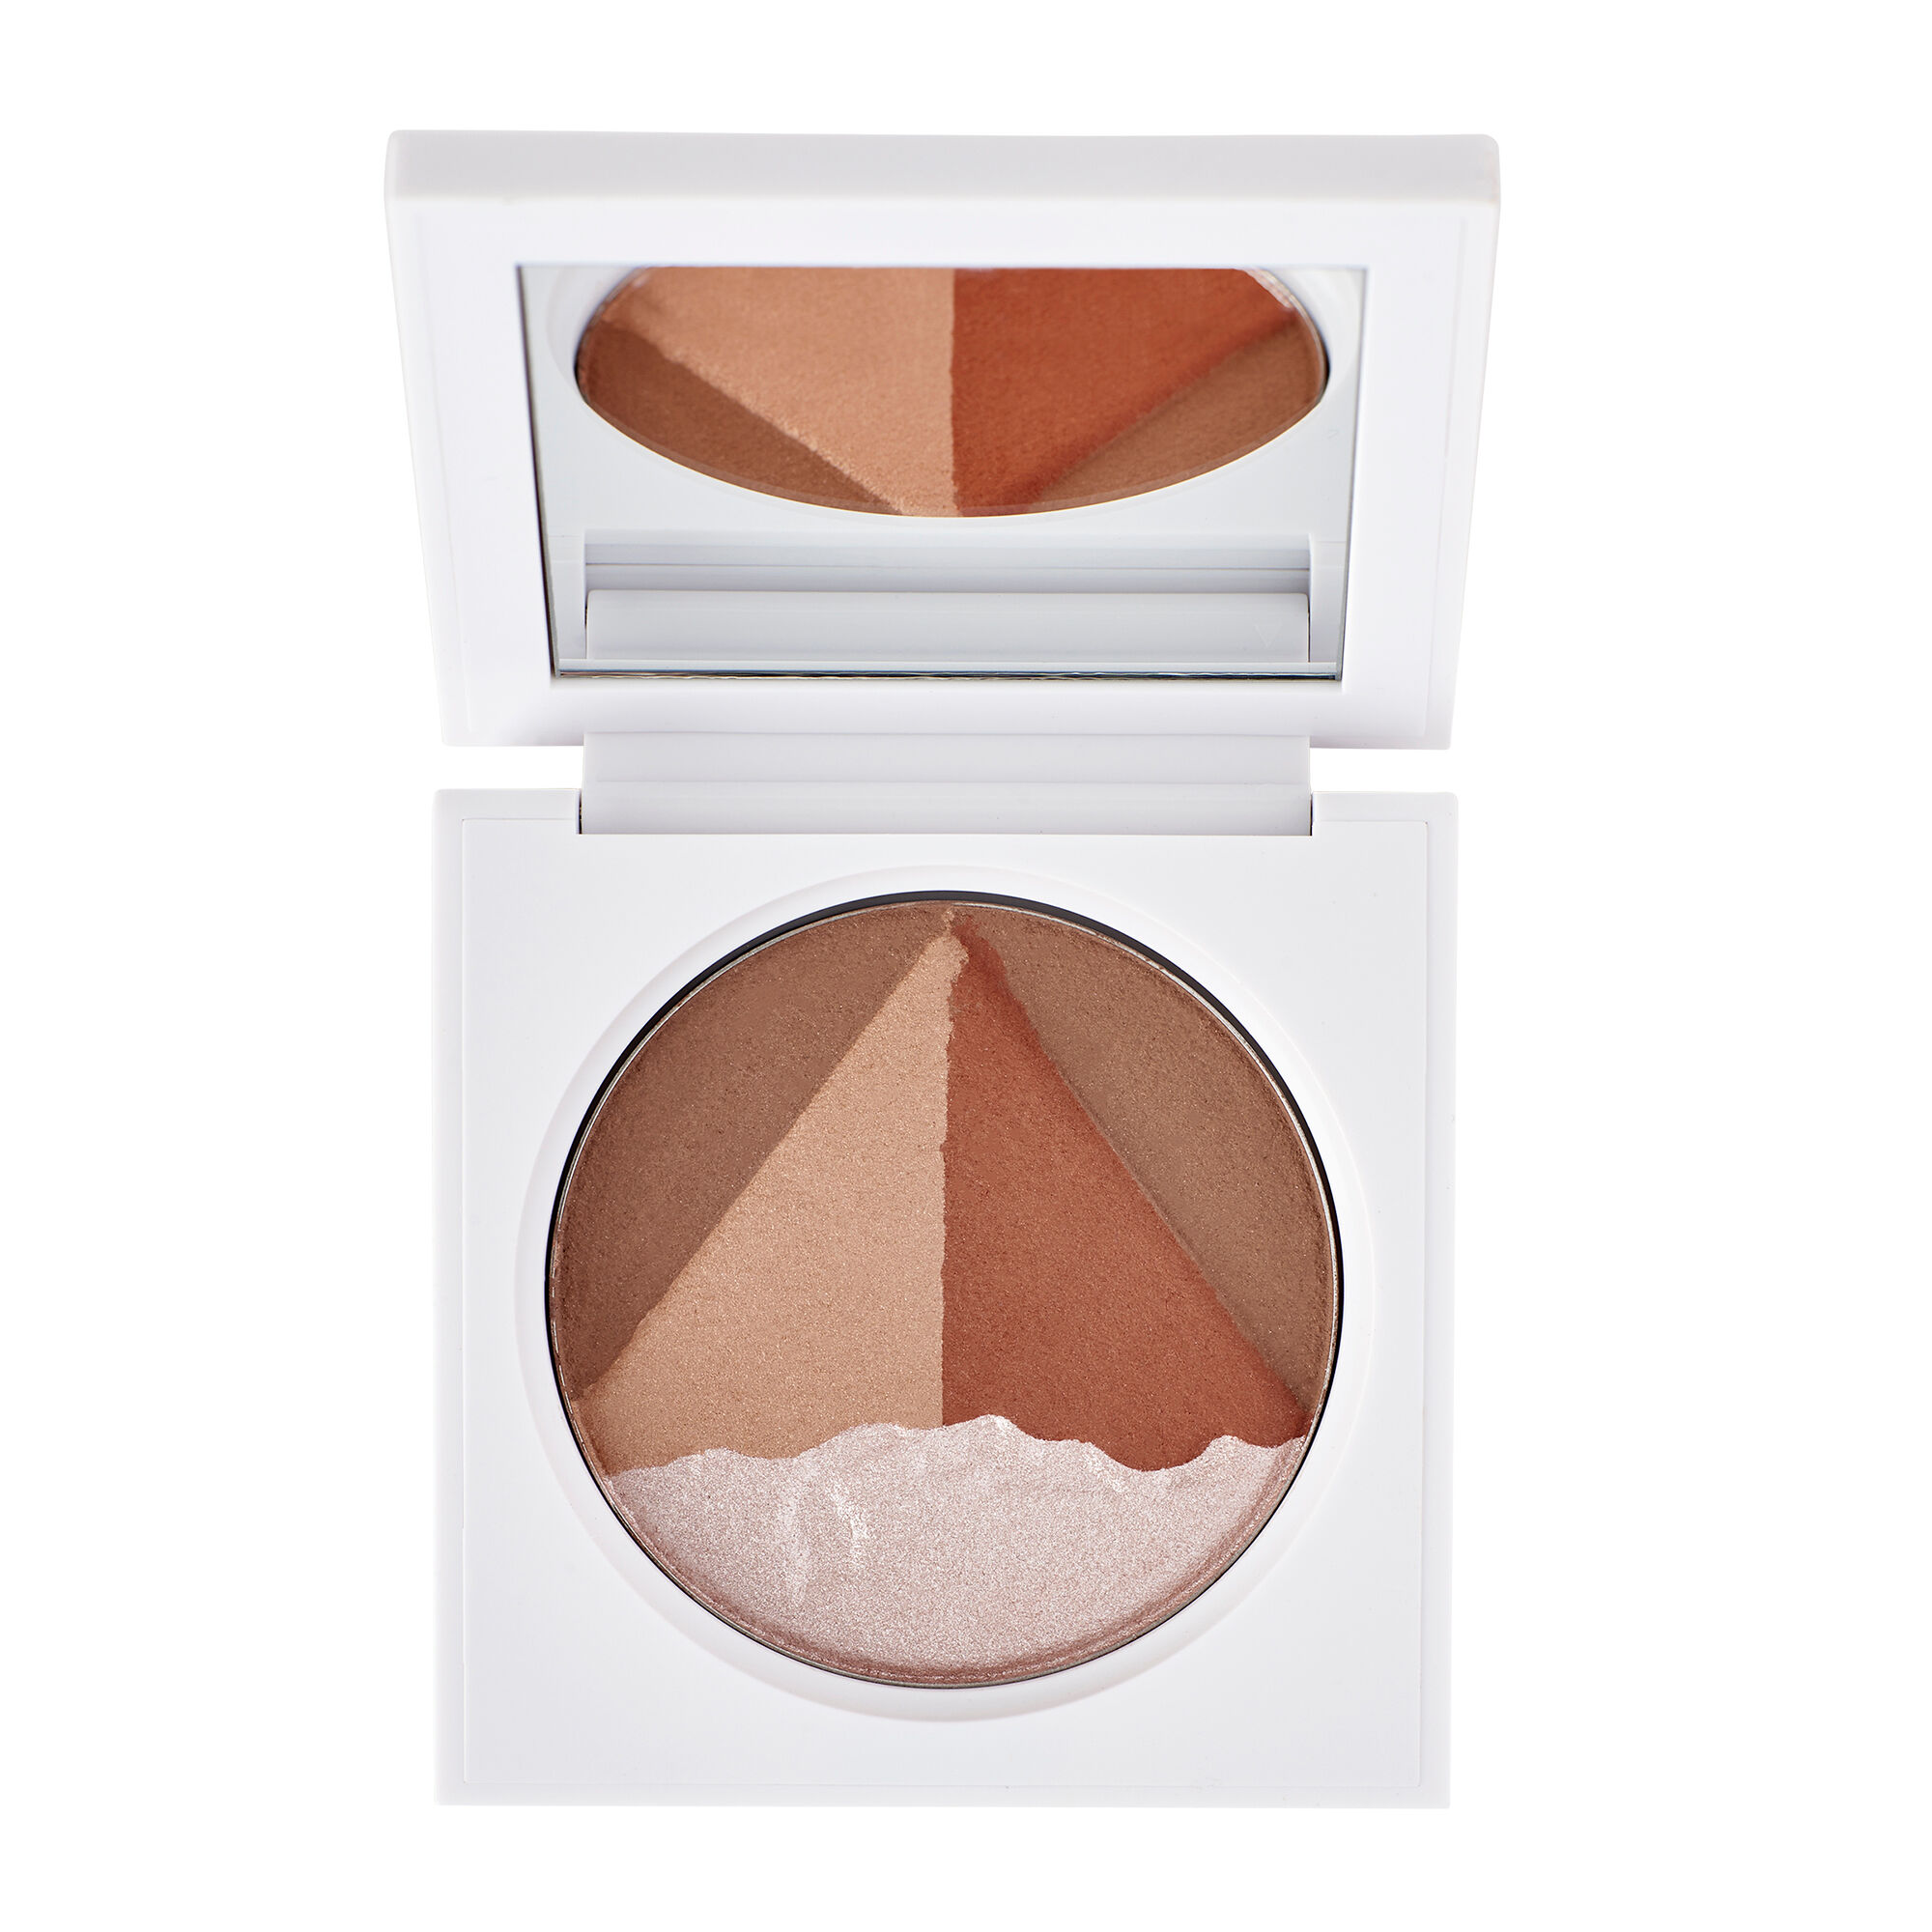 Ofra 3D Pyramid Egyptian Clay Bronzer 10g